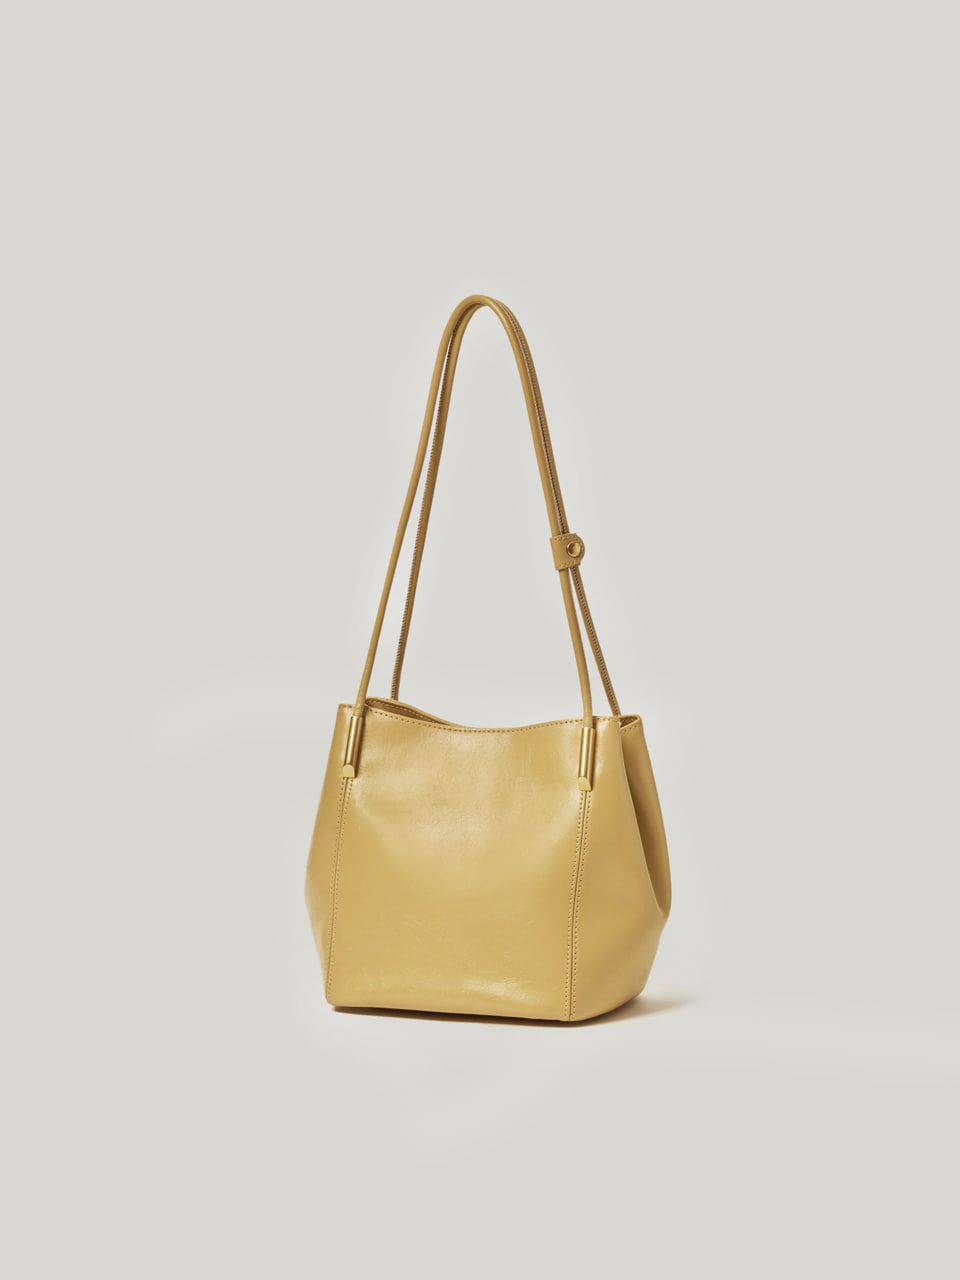 Marron Bag / Bisque Yellow (2nd Reorder)